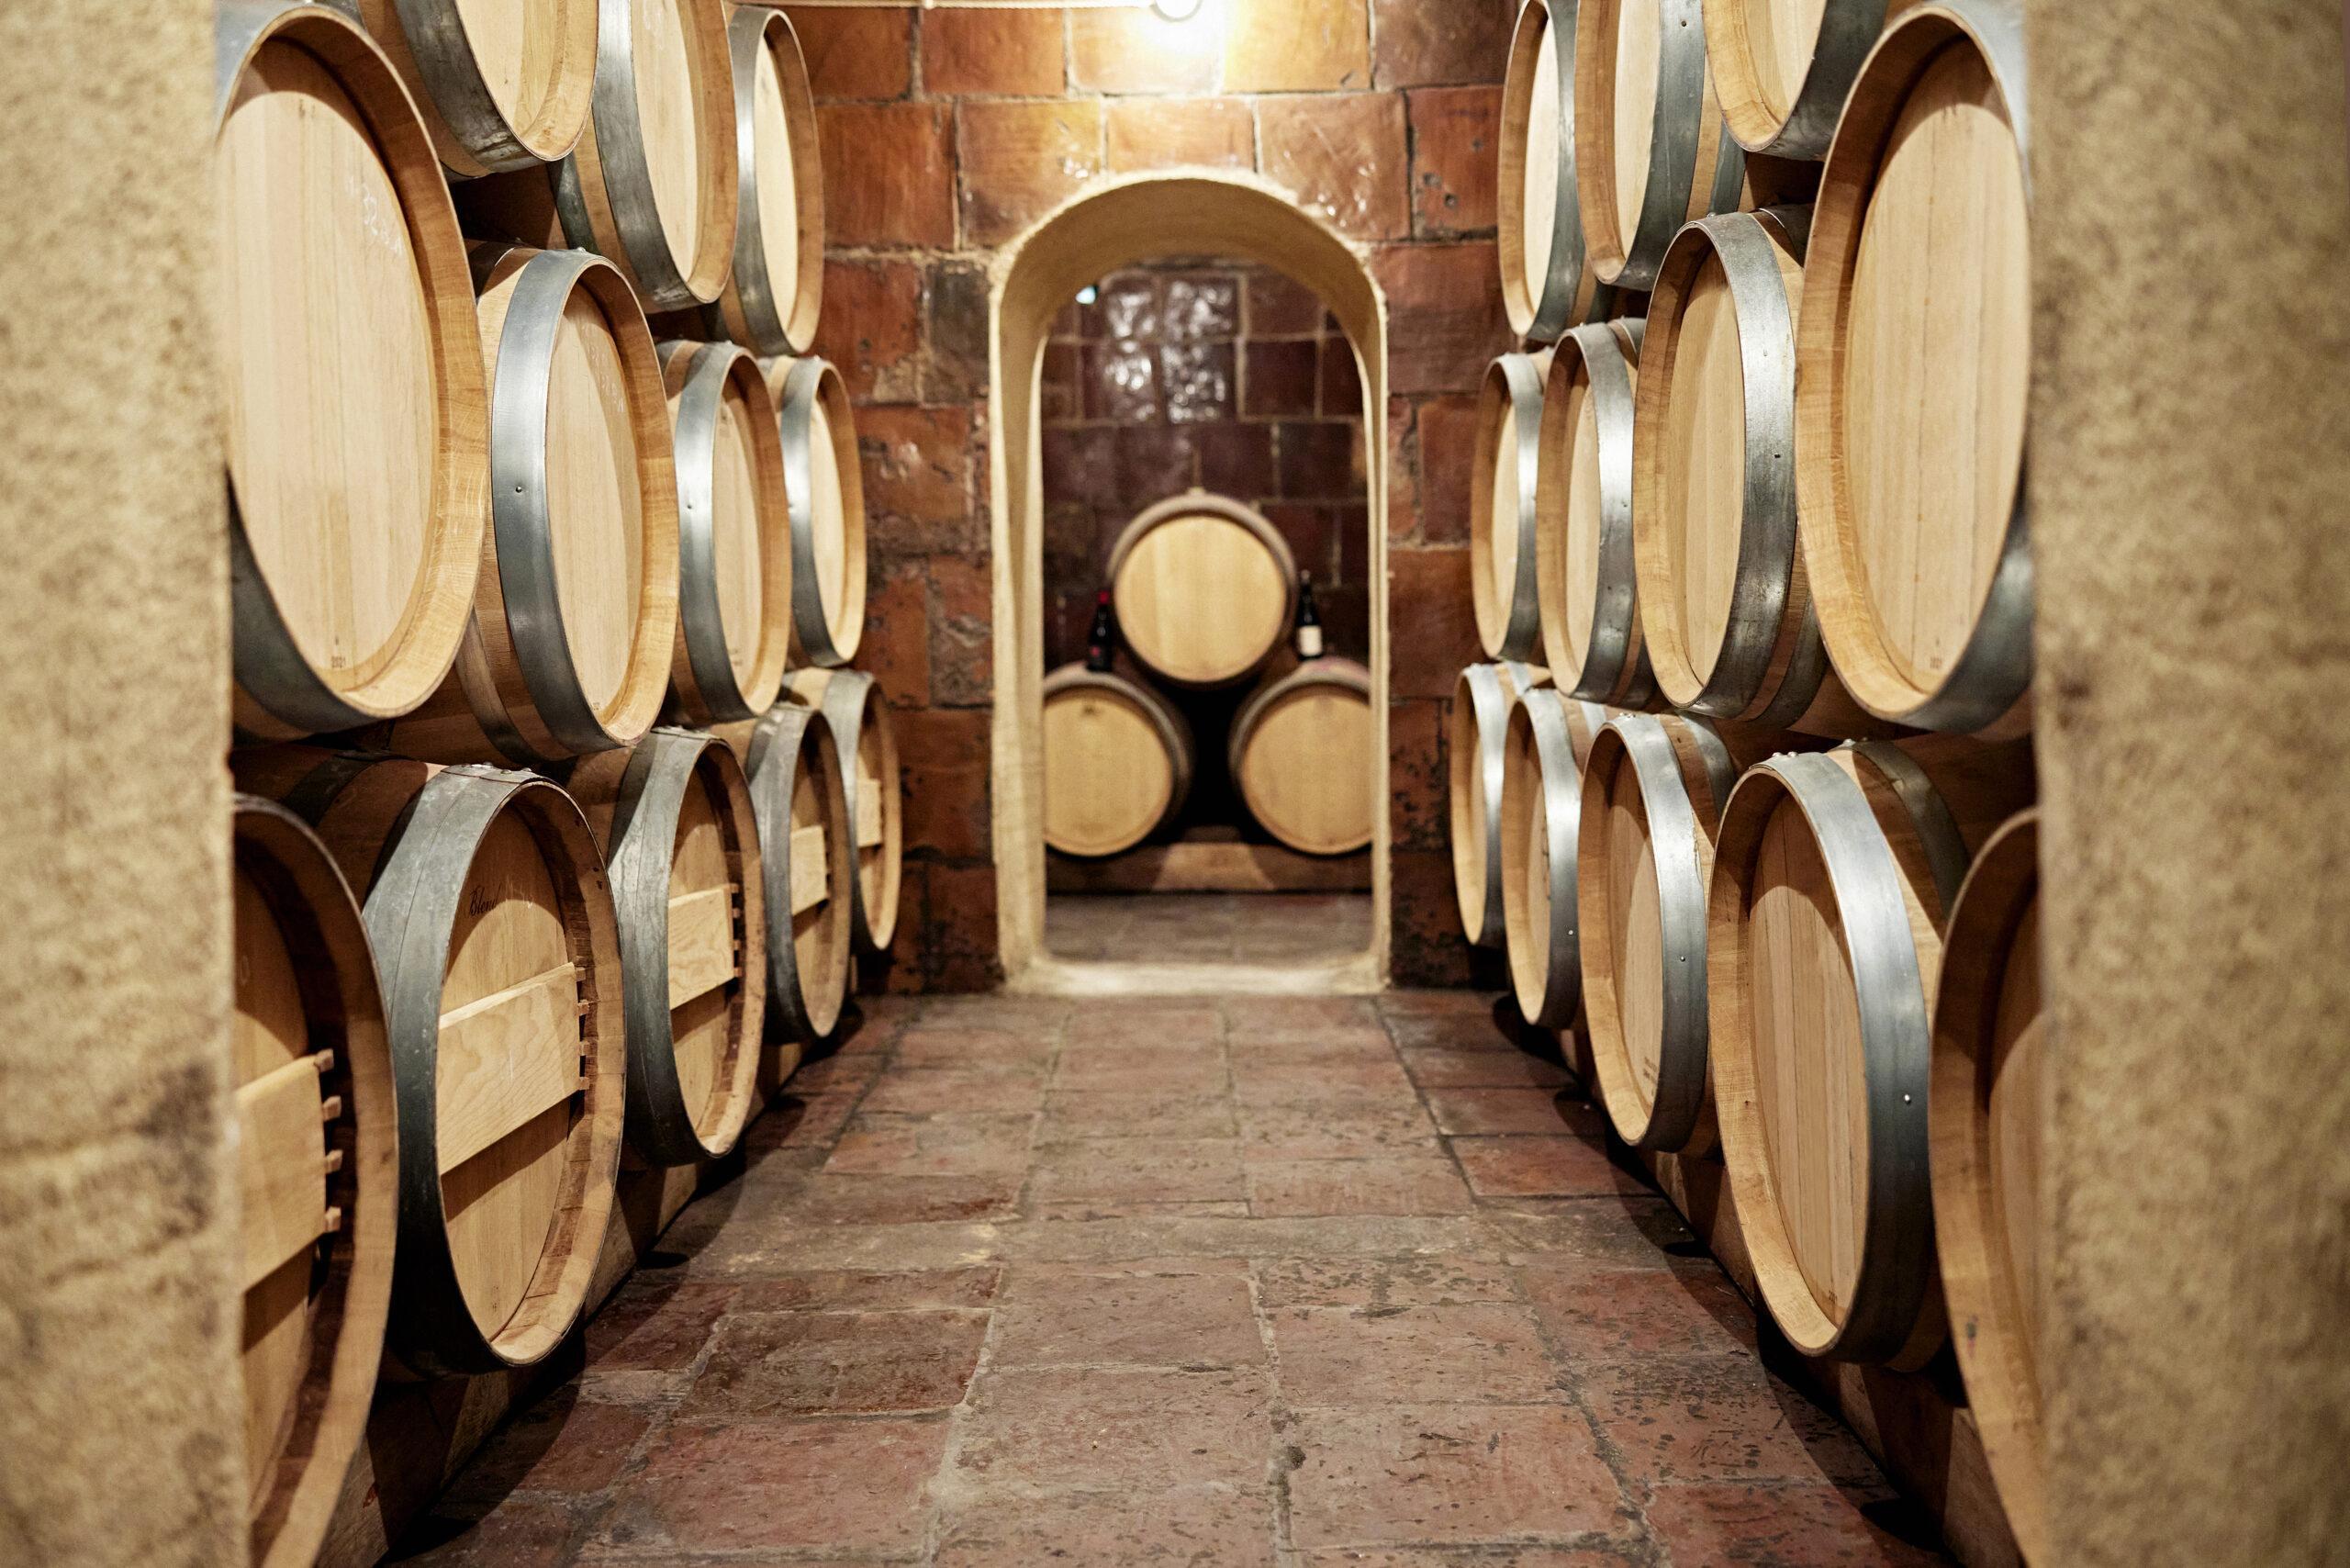 Unoccupied underground chamber with most common type of barrel used during wine-aging process, adding oxygen, tannins, and depth of flavor.